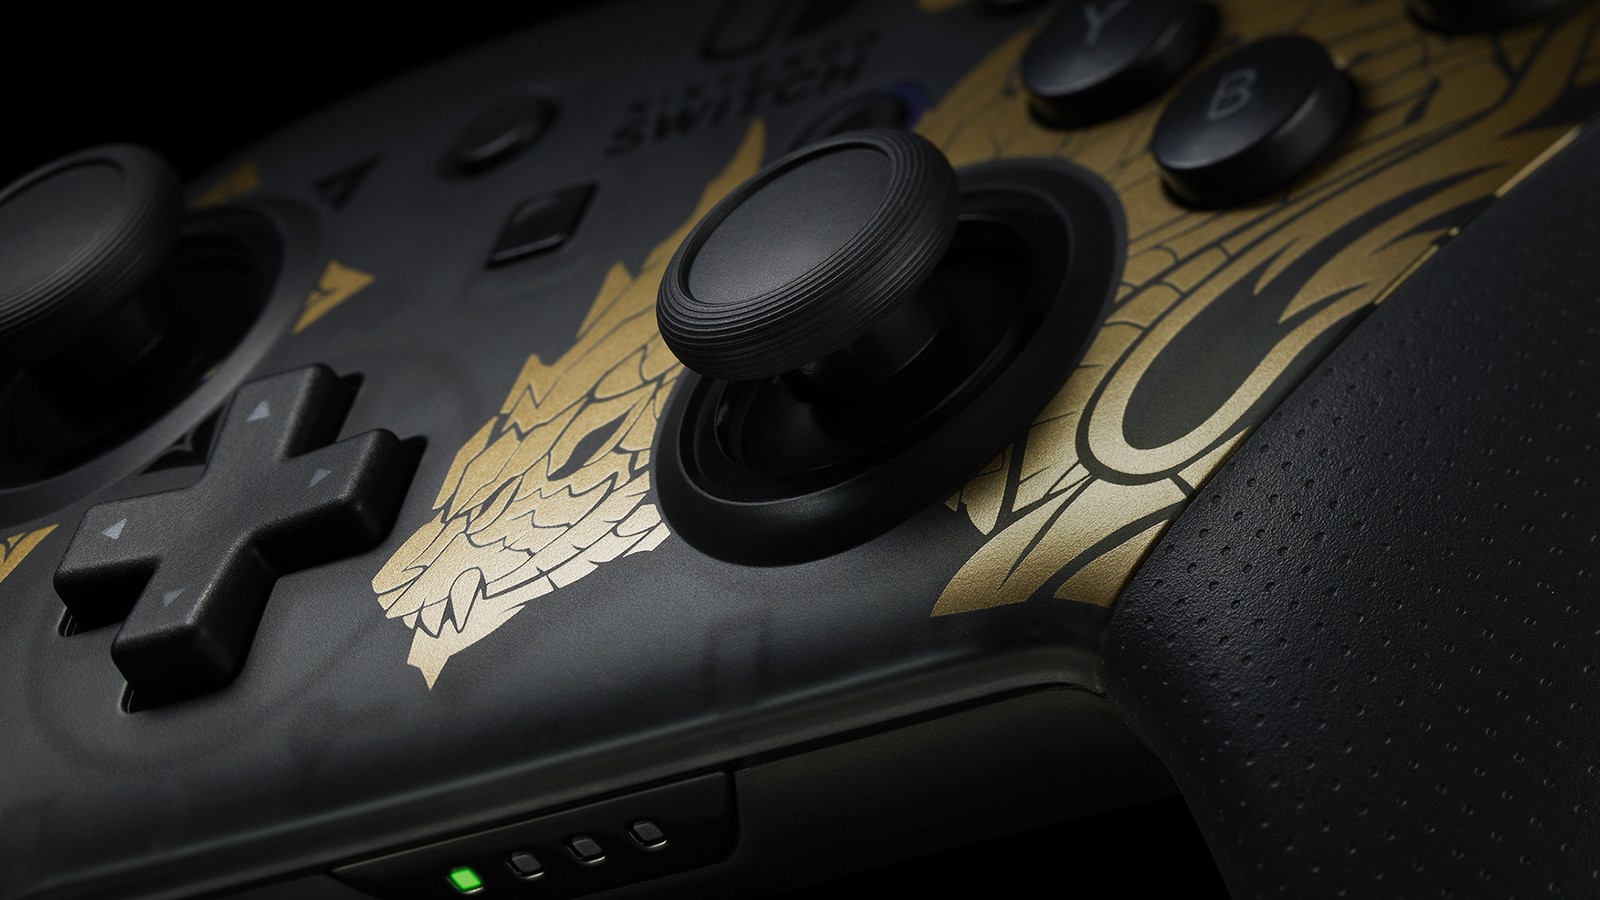 Monster Hunter Rise Switch bundle and Pro Controller revealed for 